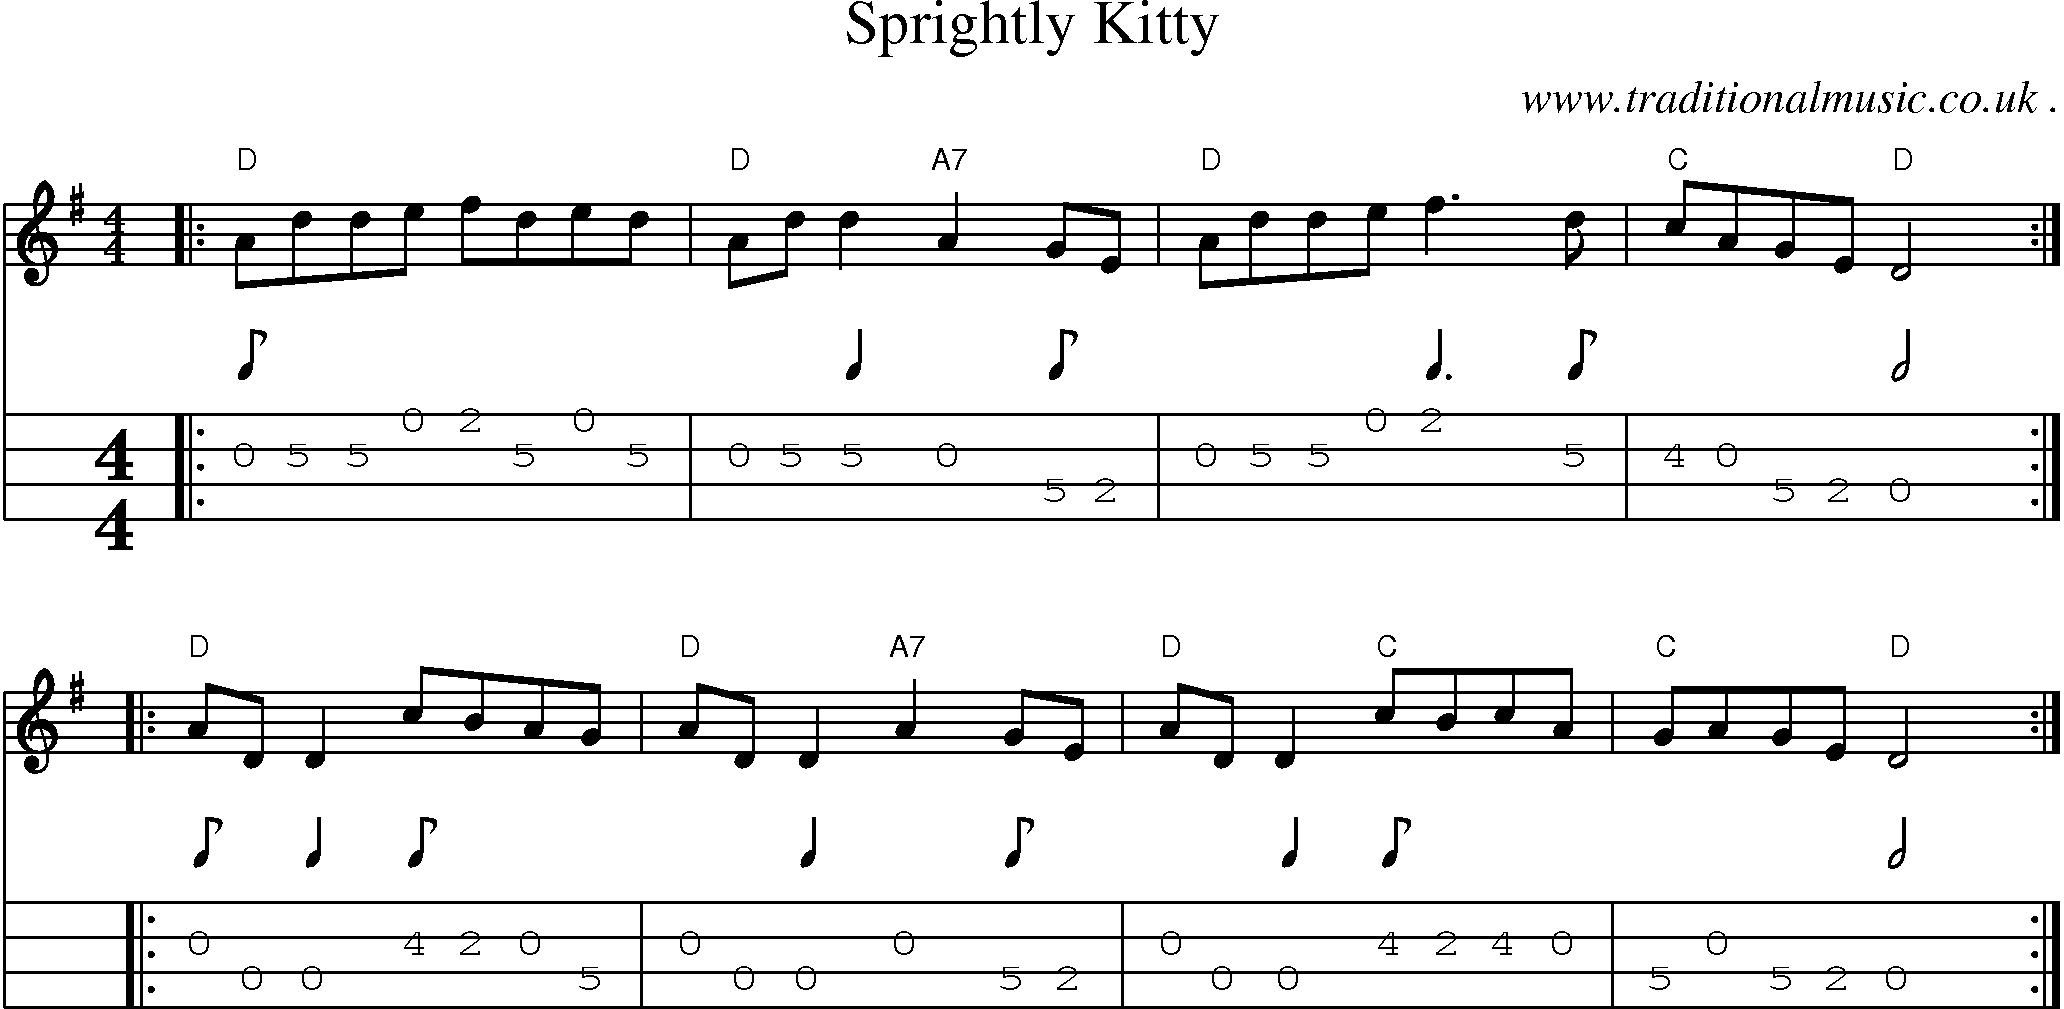 Sheet-music  score, Chords and Mandolin Tabs for Sprightly Kitty